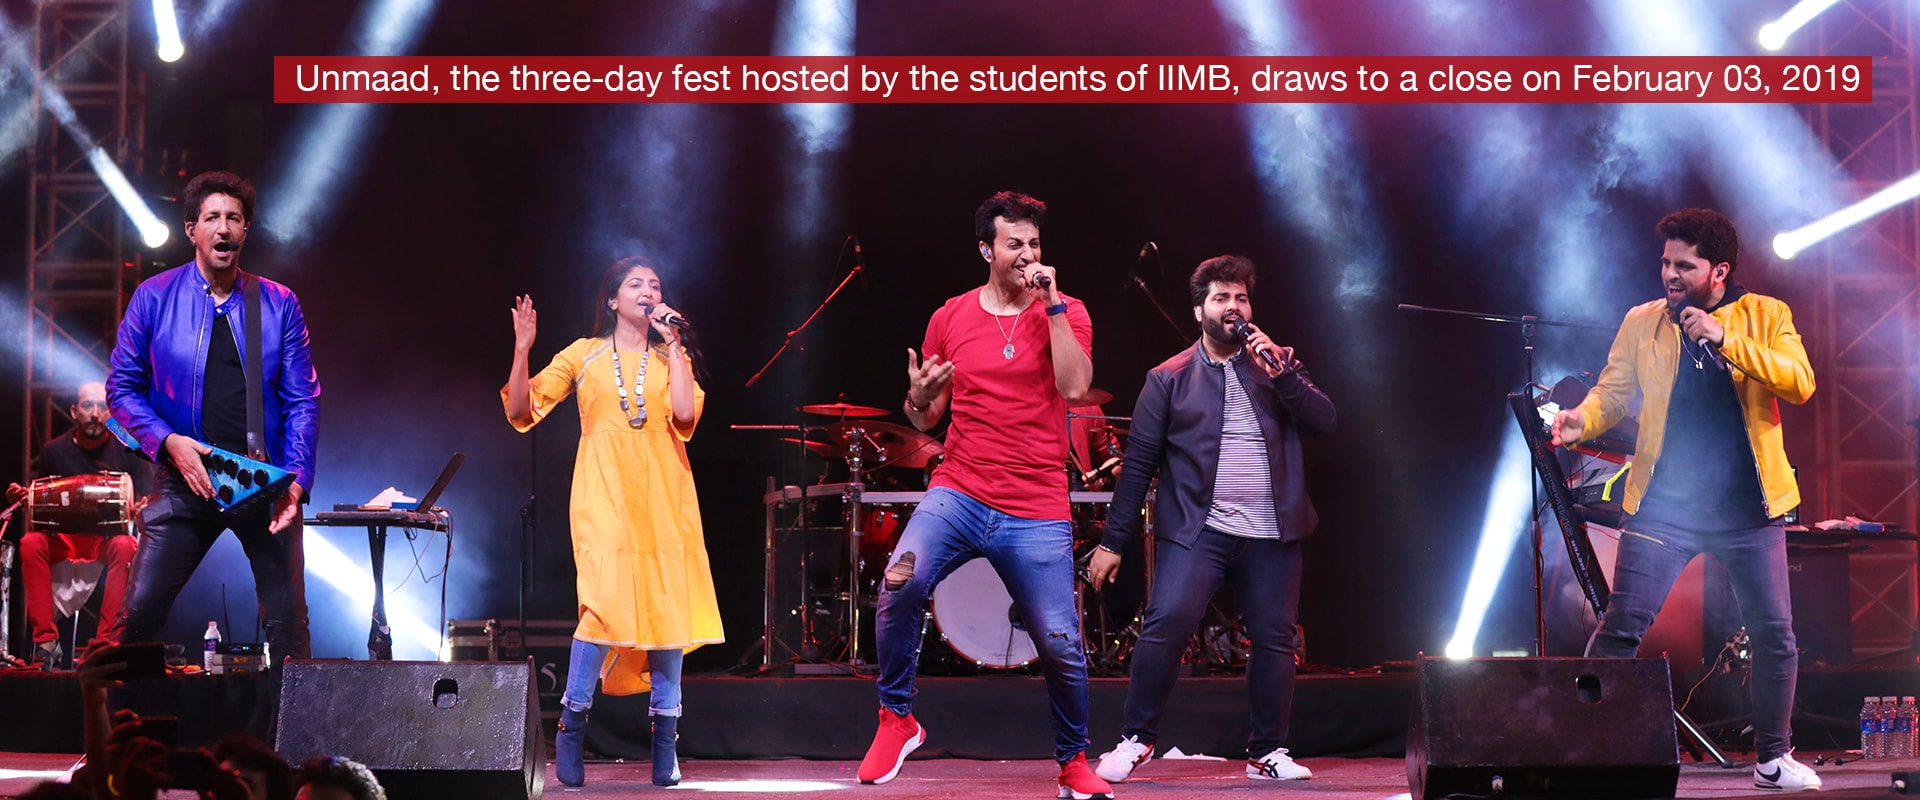 Unmaad, the three-day fest hosted by the students of IIMB, draws to a close on February 03, 2019